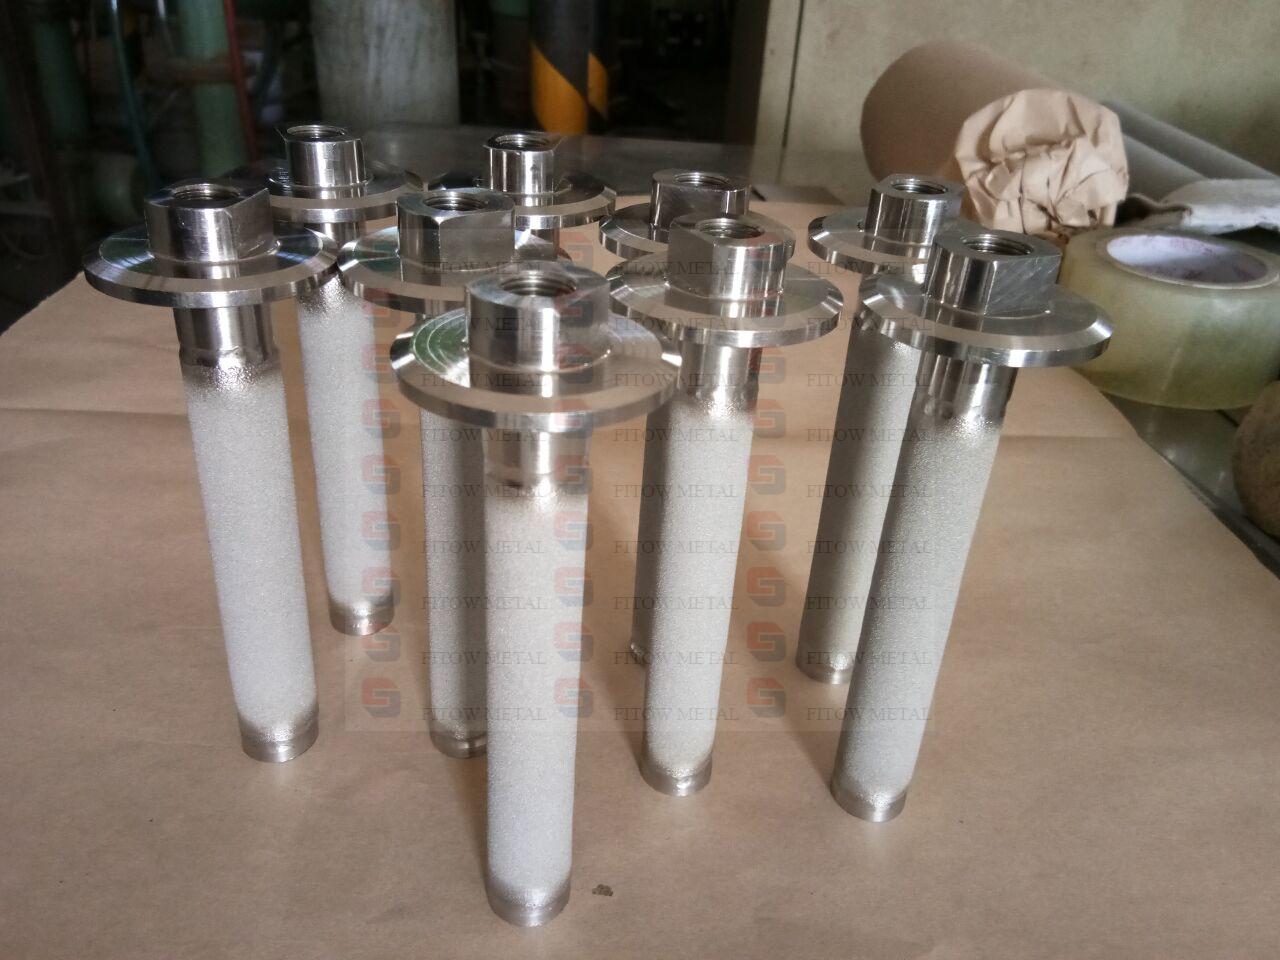 Micro-Oxygenation Carbonation Stone 316 stainless steel 20mm OD x 8” long and 2 micron porosity